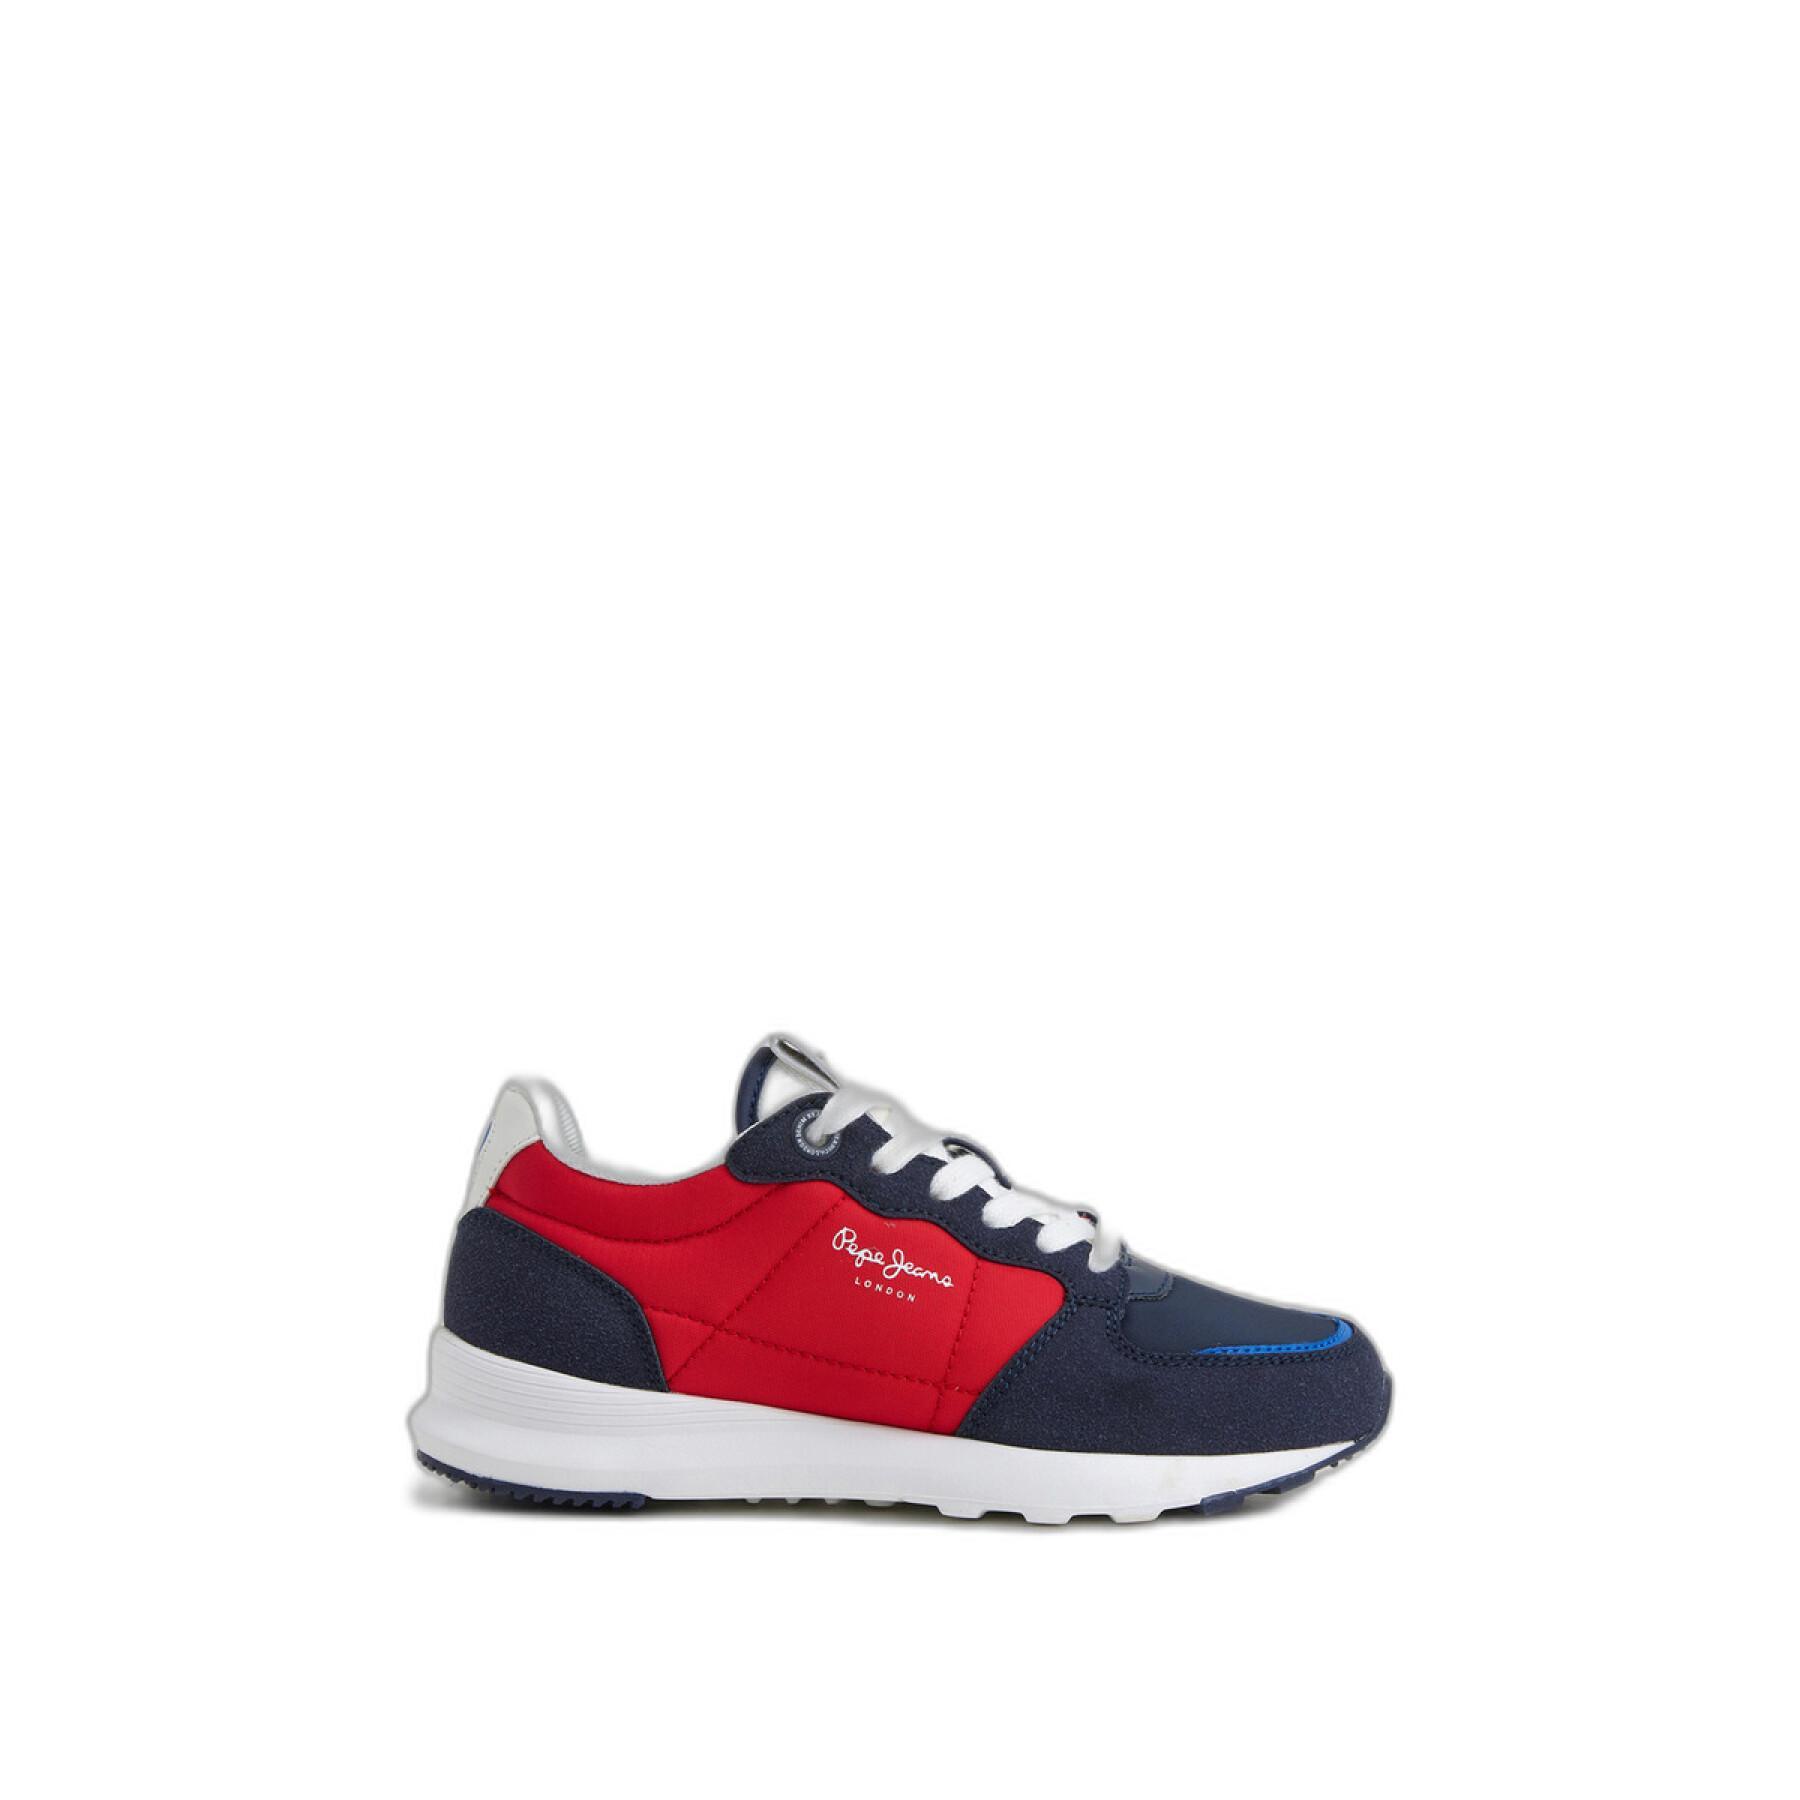 Children's sneakers Pepe Jeans York Mix